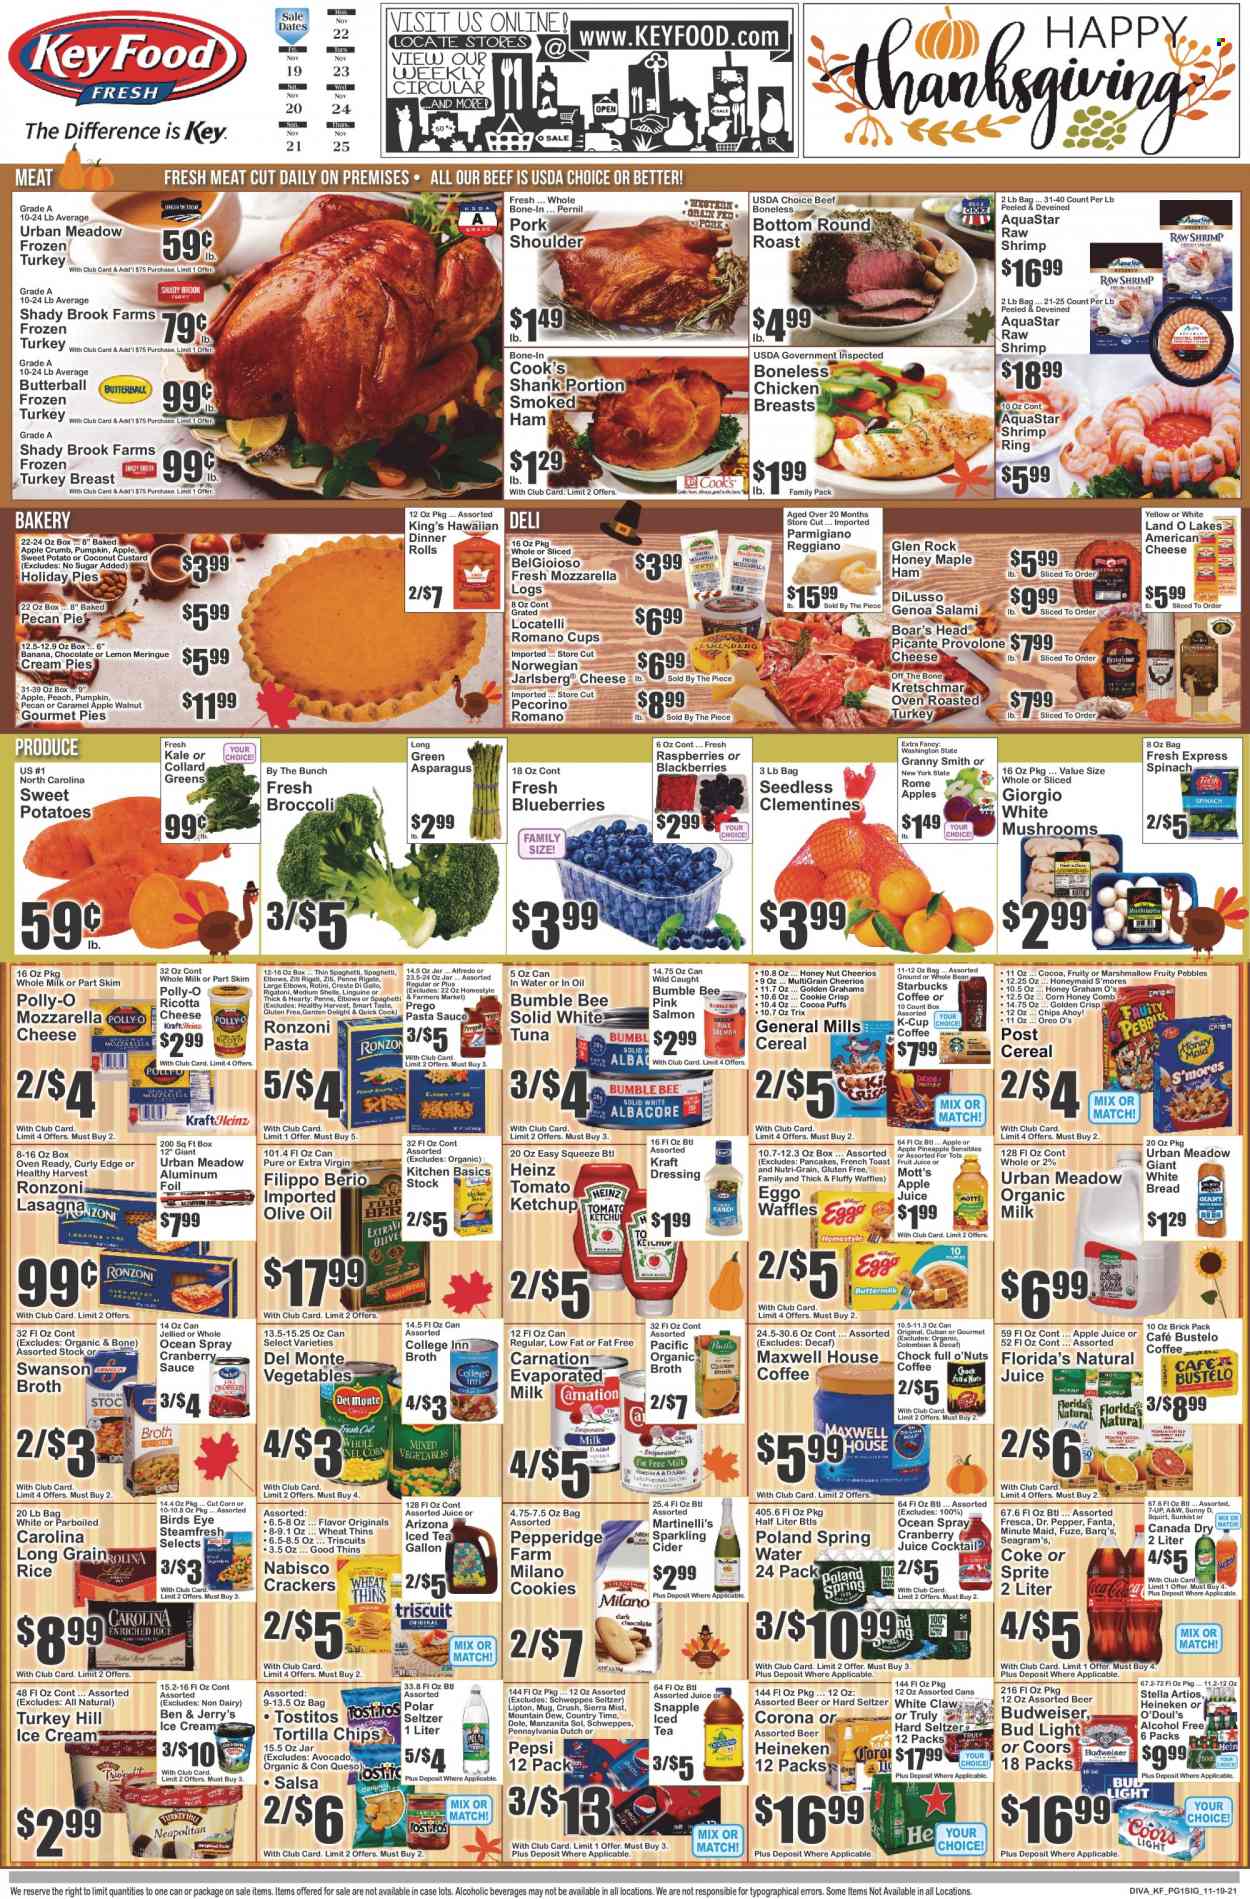 thumbnail - Key Food Flyer - 11/19/2021 - 11/25/2021 - Sales products - bread, white bread, pie, dinner rolls, puffs, cream pie, waffles, asparagus, broccoli, corn, collard greens, spinach, sweet potato, kale, potatoes, Dole, avocado, blackberries, pineapple, Granny Smith, Mott's, salmon, tuna, shrimps, pasta sauce, Bumble Bee, sauce, pancakes, Bird's Eye, lasagna meal, Kraft®, Butterball, salami, ham, smoked ham, Cook's, american cheese, mozzarella, ricotta, Pecorino, Parmigiano Reggiano, Provolone, custard, Oreo, evaporated milk, organic milk, ice cream, Ben & Jerry's, cookies, crackers, Chips Ahoy!, Florida's Natural, tortilla chips, Thins, Tostitos, broth, Heinz, cereals, Cheerios, Trix, Fruity Pebbles, Nutri-Grain, rice, penne, long grain rice, ketchup, dressing, salsa, extra virgin olive oil, olive oil, cranberry sauce, apple juice, Canada Dry, Coca-Cola, cranberry juice, Mountain Dew, Schweppes, Sprite, Pepsi, juice, fruit juice, Fanta, Lipton, ice tea, Dr. Pepper, 7UP, AriZona, Snapple, A&W, Sierra Mist, Country Time, fruit punch, spring water, Maxwell House, coffee, Starbucks, coffee capsules, K-Cups, sparkling cider, sparkling wine, White Claw, Hard Seltzer, TRULY, cider, beer, Bud Light, Corona Extra, Heineken, Sol, whole turkey, chicken breasts, beef meat, round roast, pork meat, pork shoulder, comb, mug, Budweiser, clementines, Coors. Page 1.